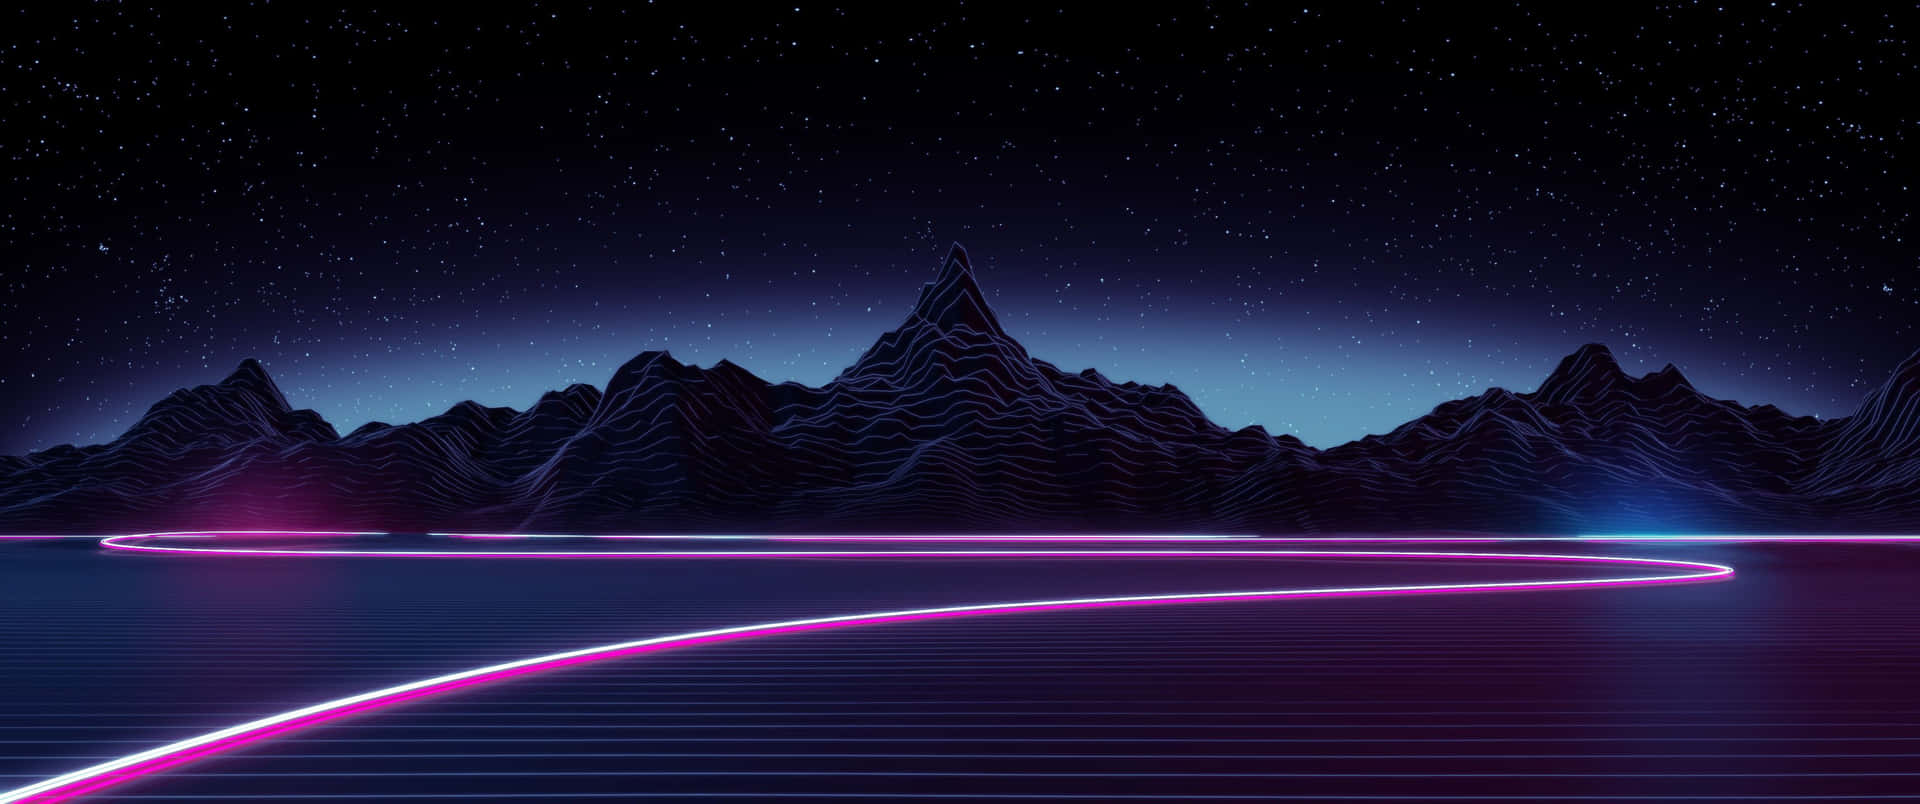 Aesthetic Star 3440 X 1440 Background